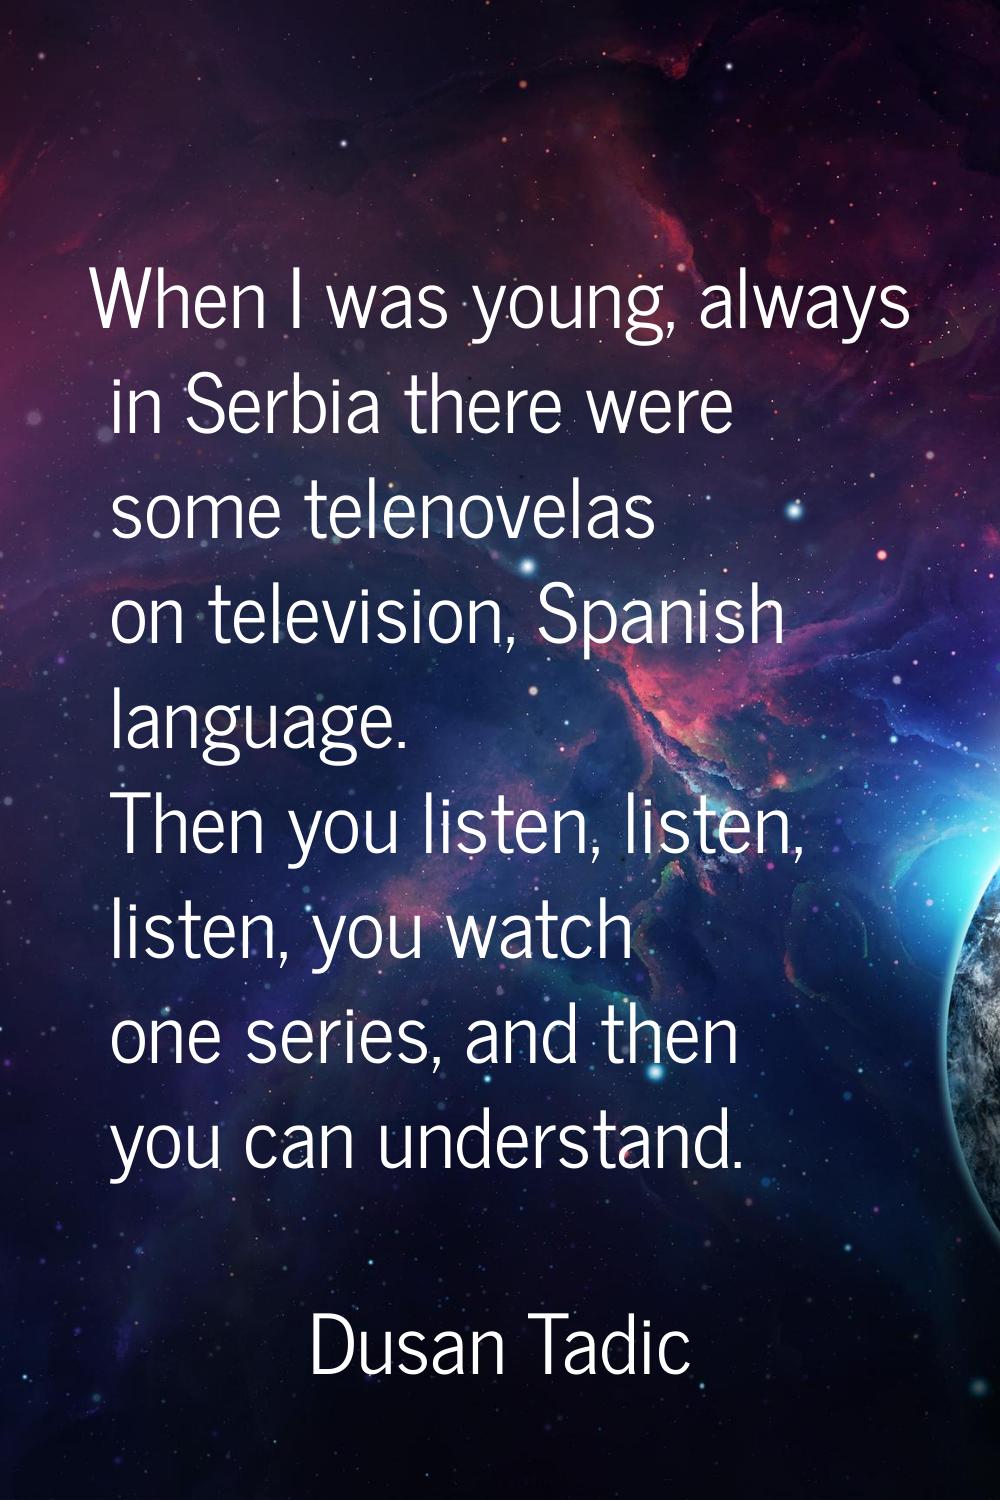 When I was young, always in Serbia there were some telenovelas on television, Spanish language. The